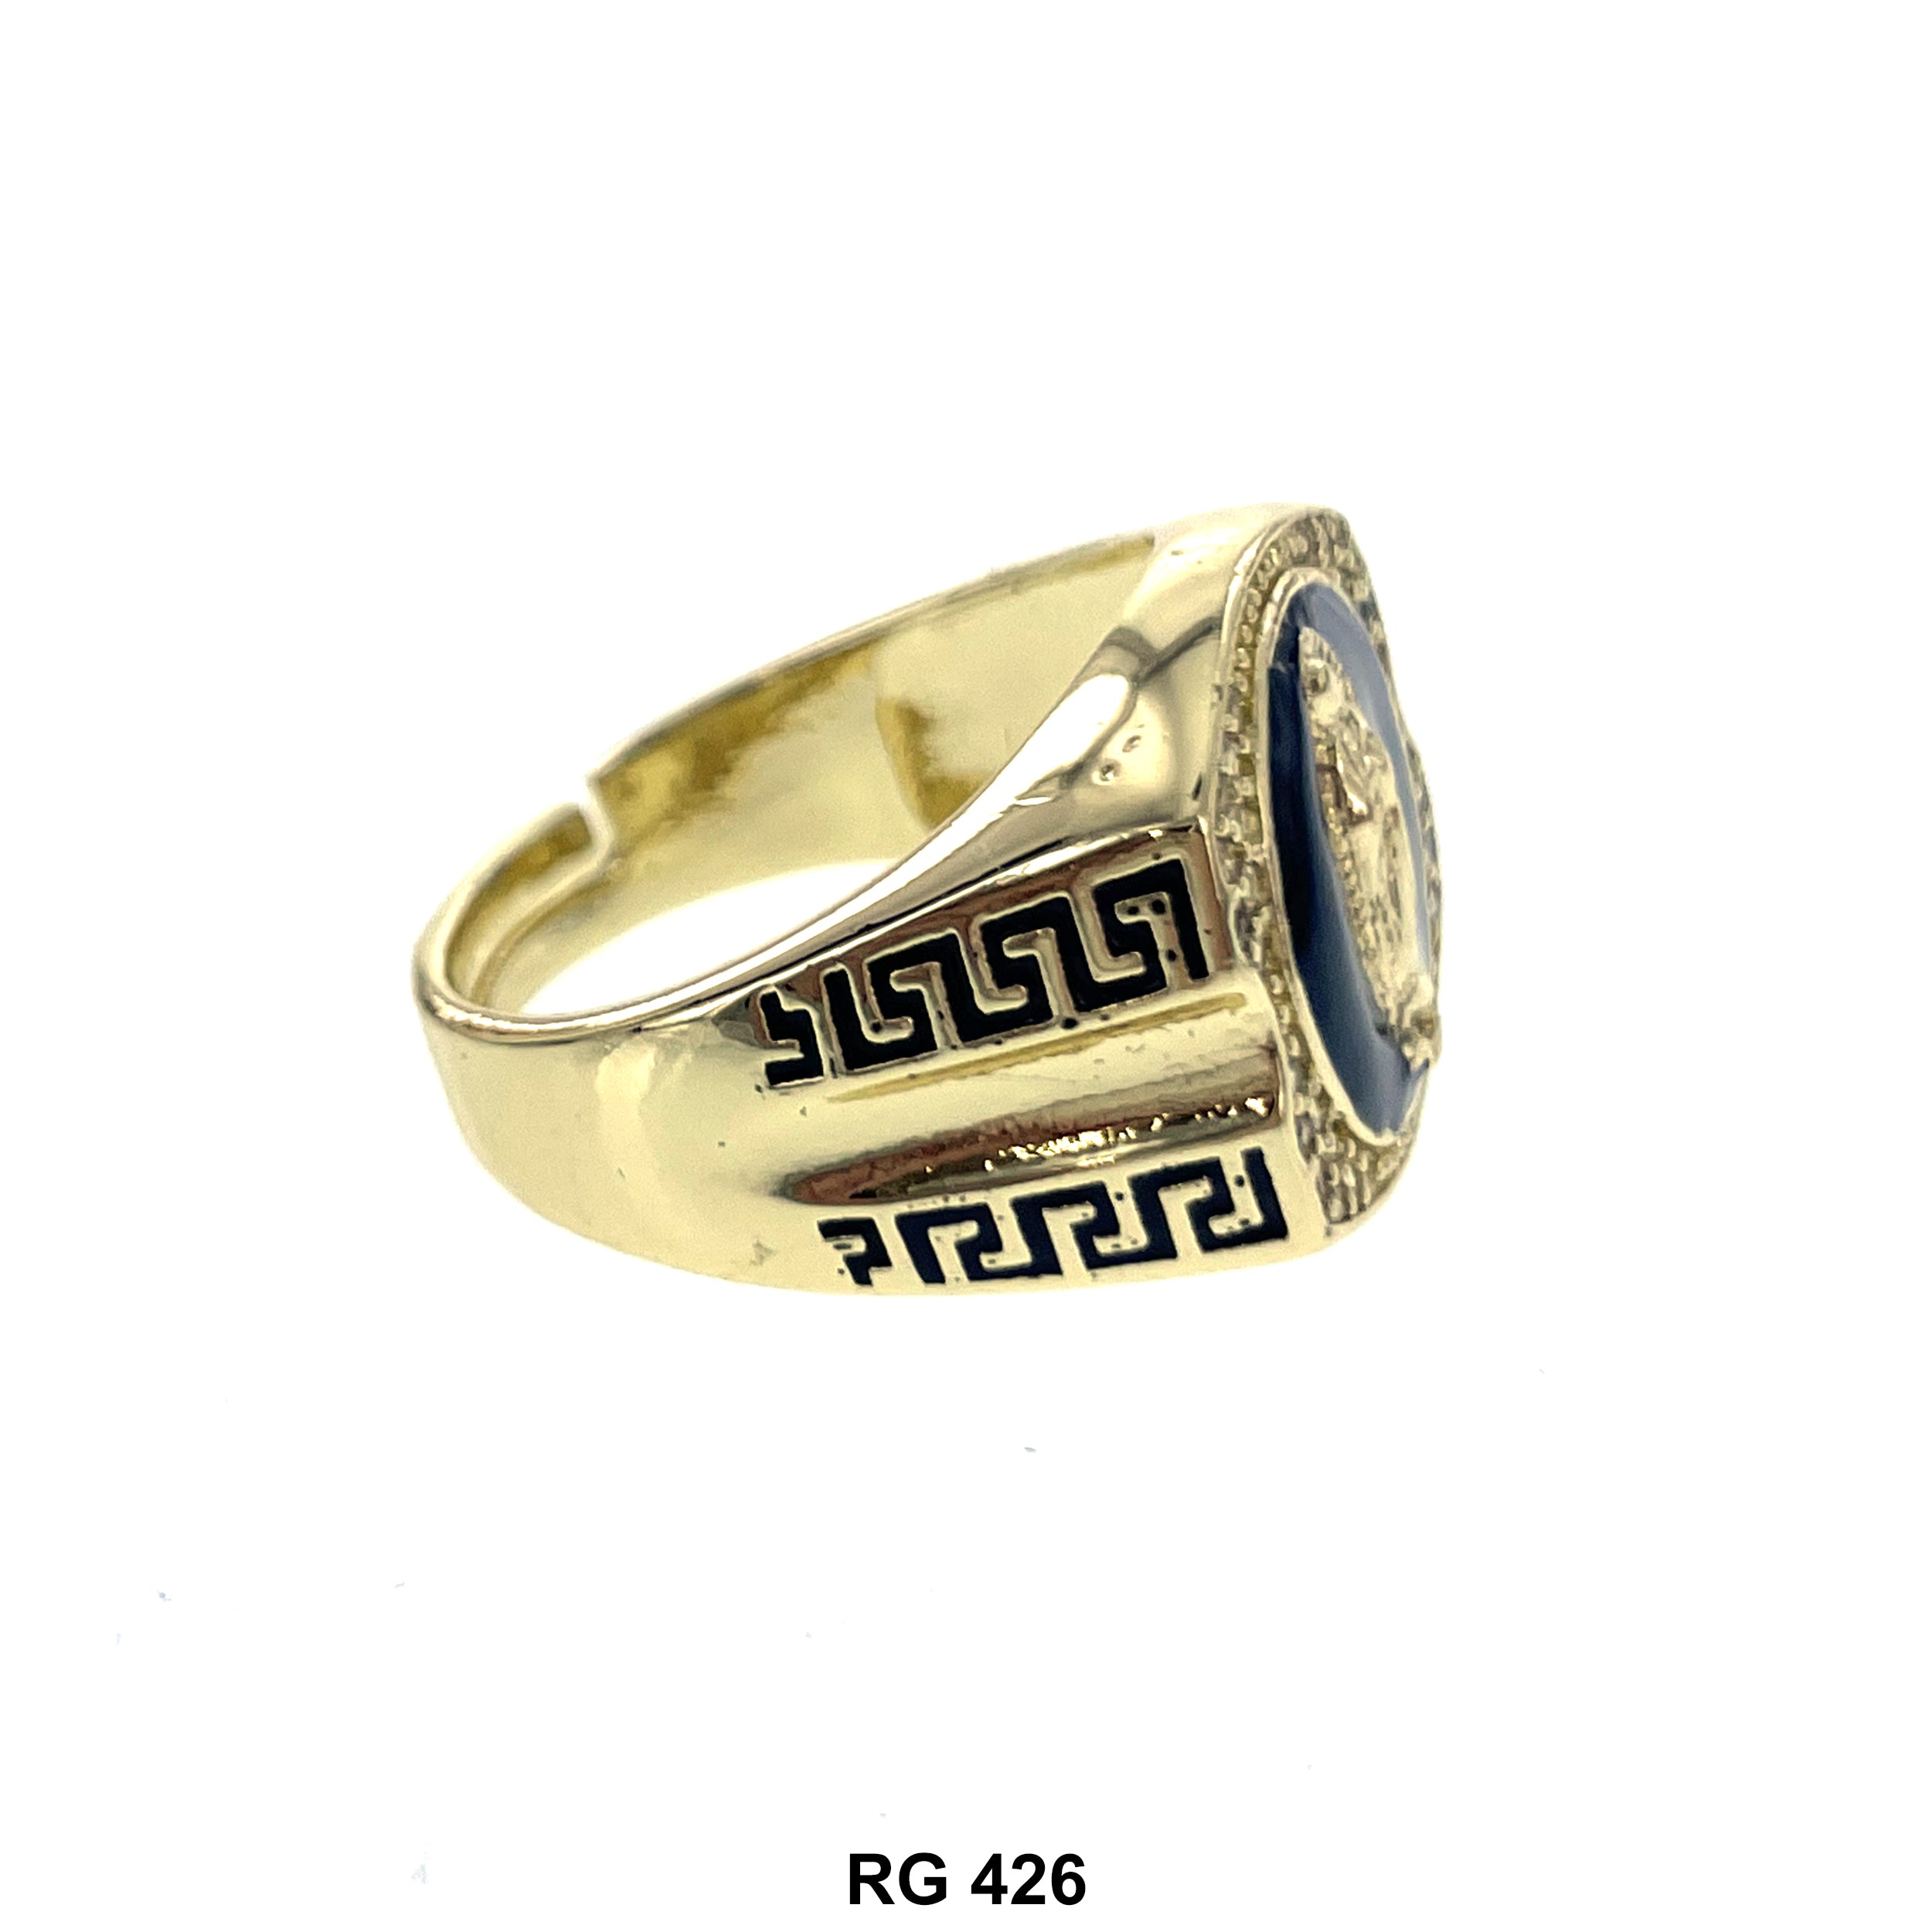 Guadalupe Adjustable Ring RG 426